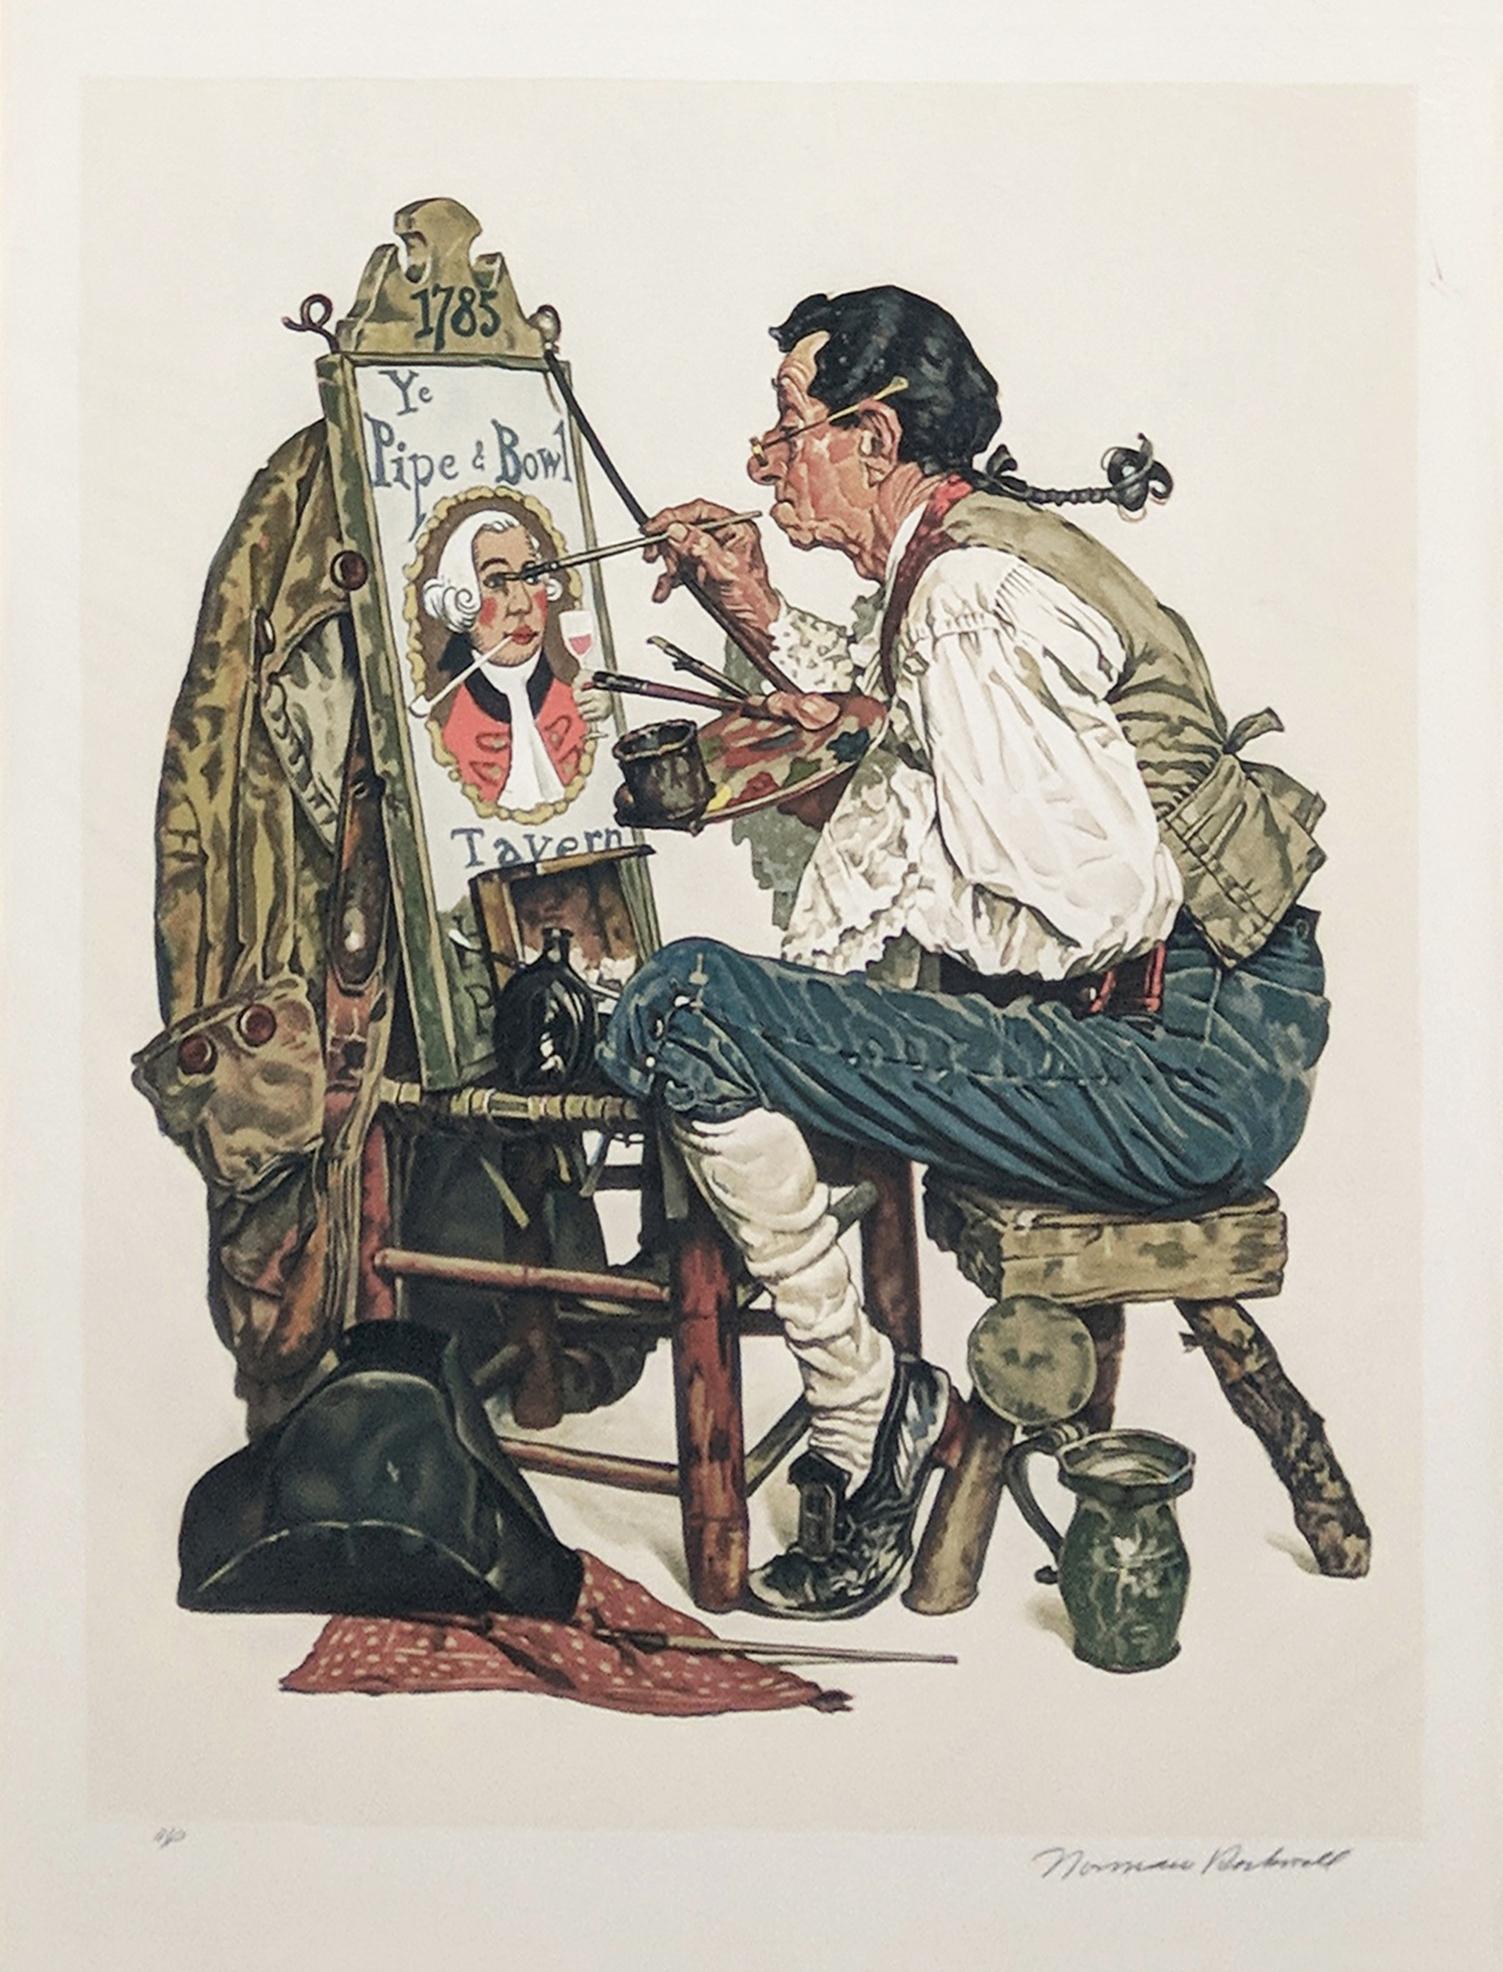 YE PIPE AND BOWL - Print by Norman Rockwell